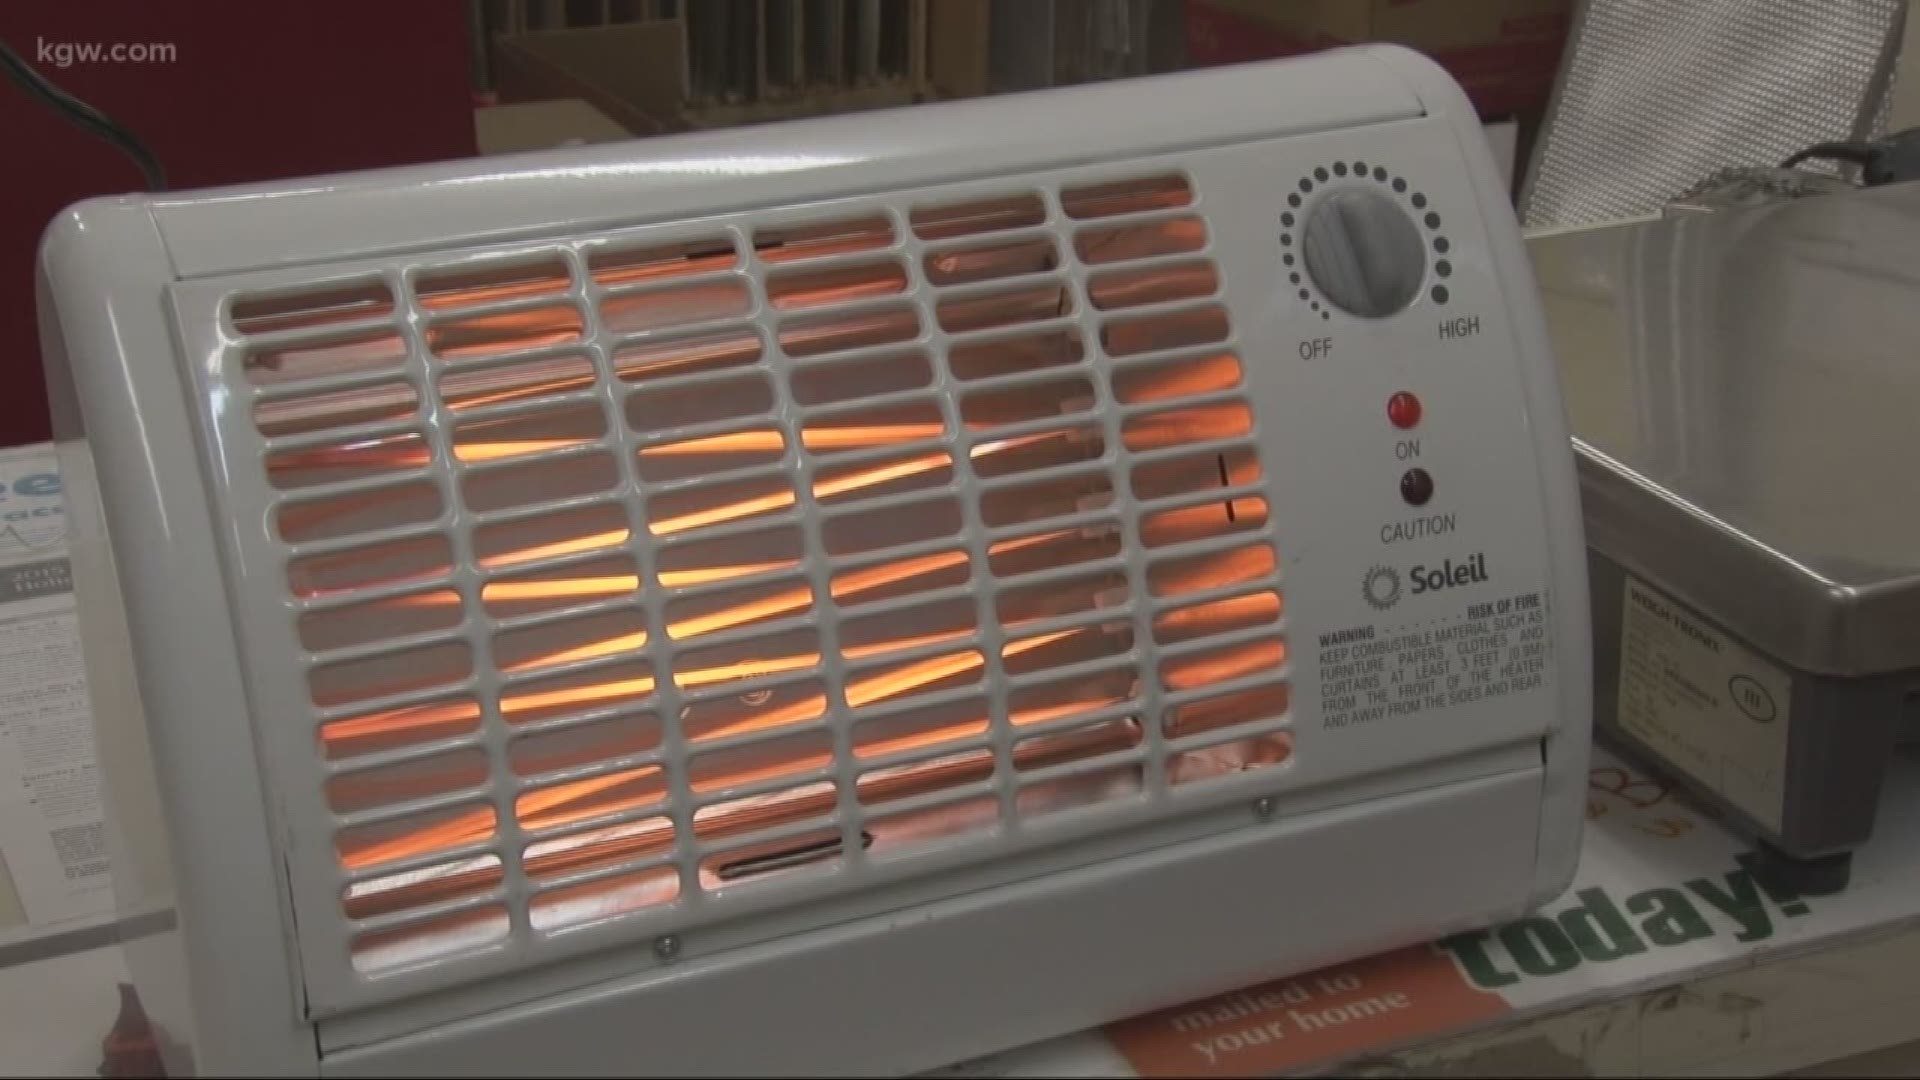 Overnight temperatures are set to plummet below freezing in Portland this week, so many homeowners will take out their space heaters to stay warm. We wanted to Verify: What's the safest way to use a space heater?